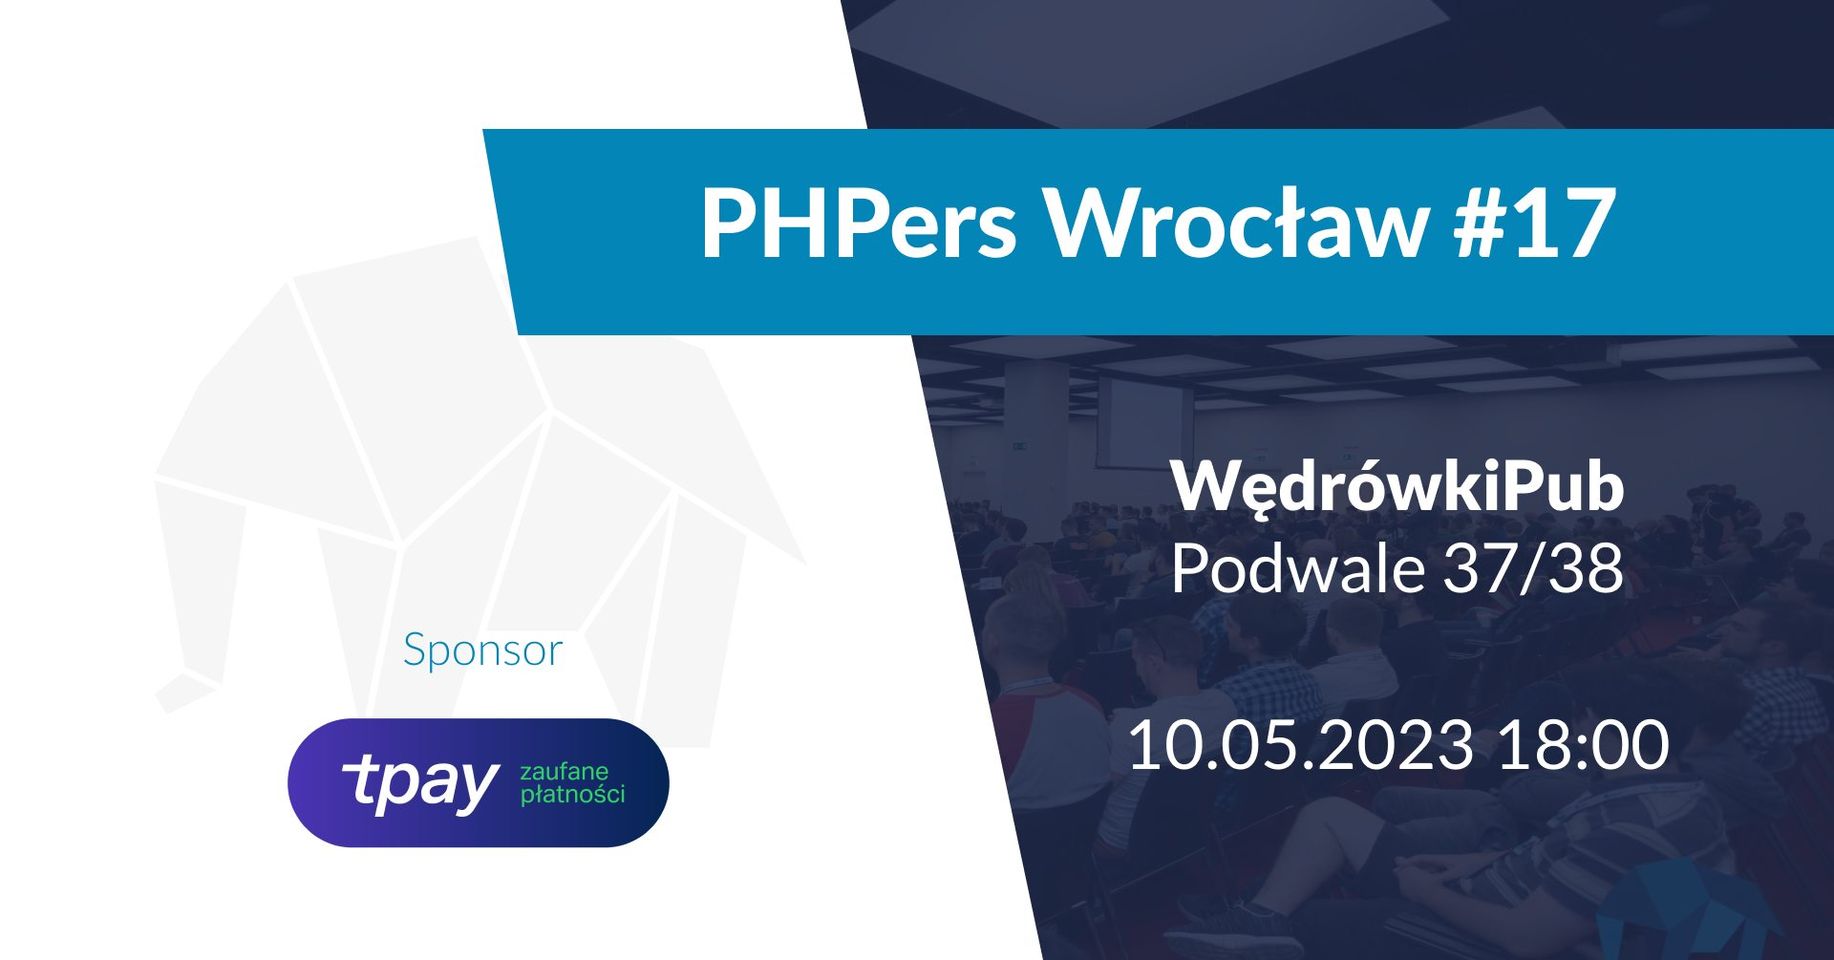 phpers-wroclaw-17